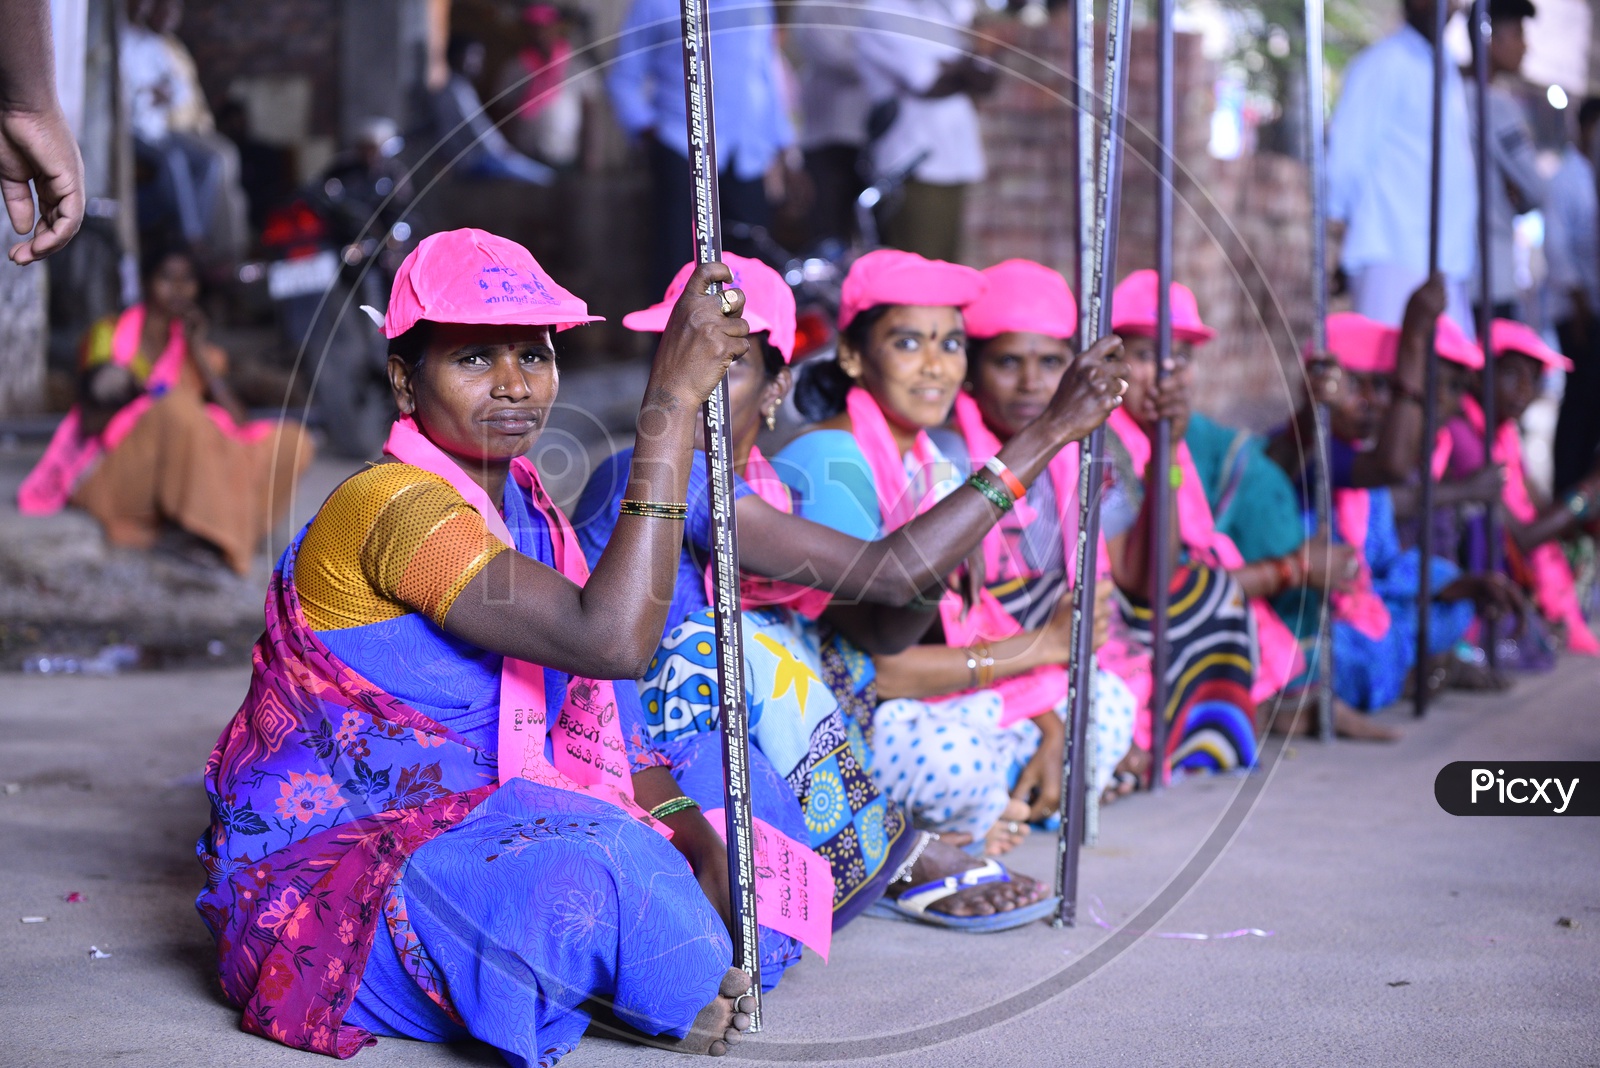 Supporters of TRS at Election Campaign for Telangana Assembly Elections 2018.